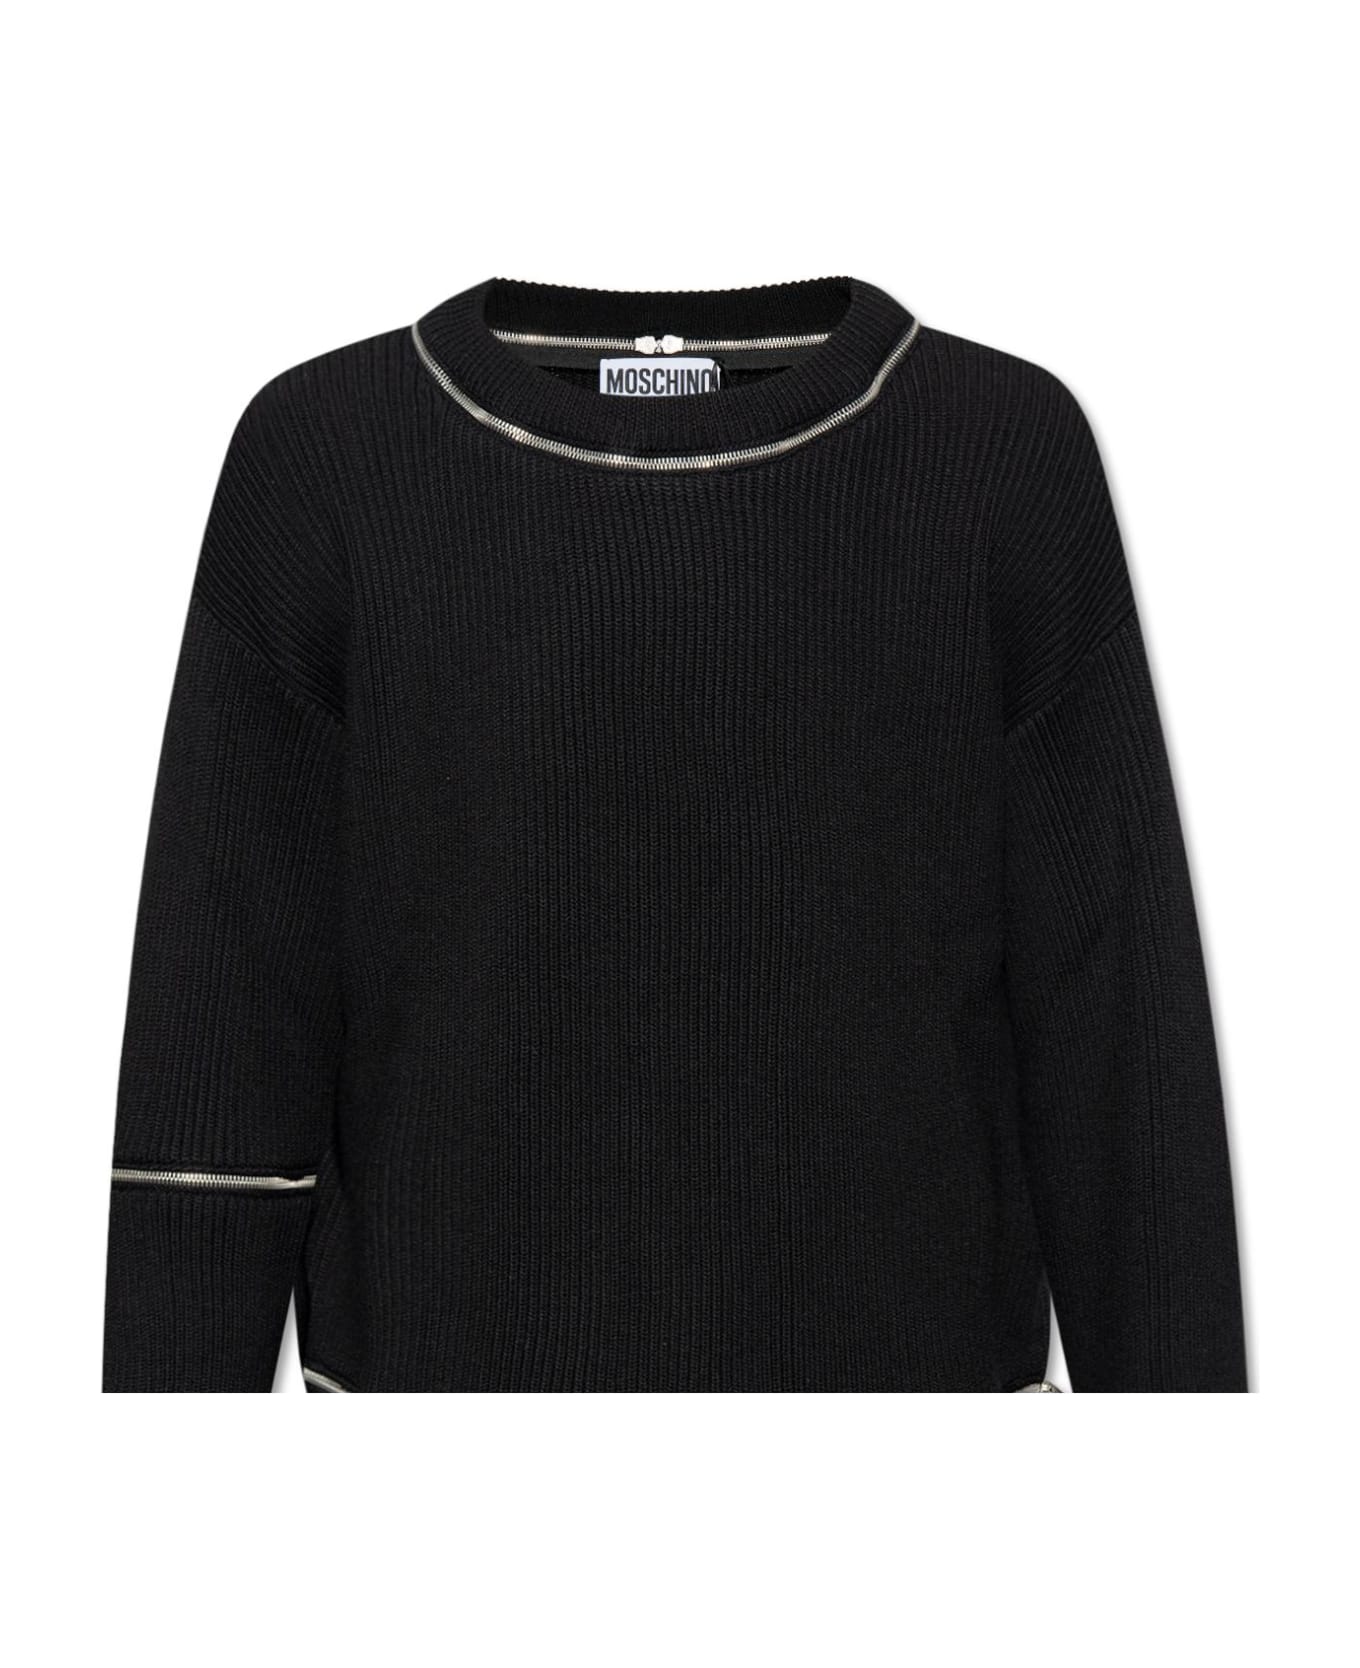 Moschino Wool Sweater With Zips - A0555